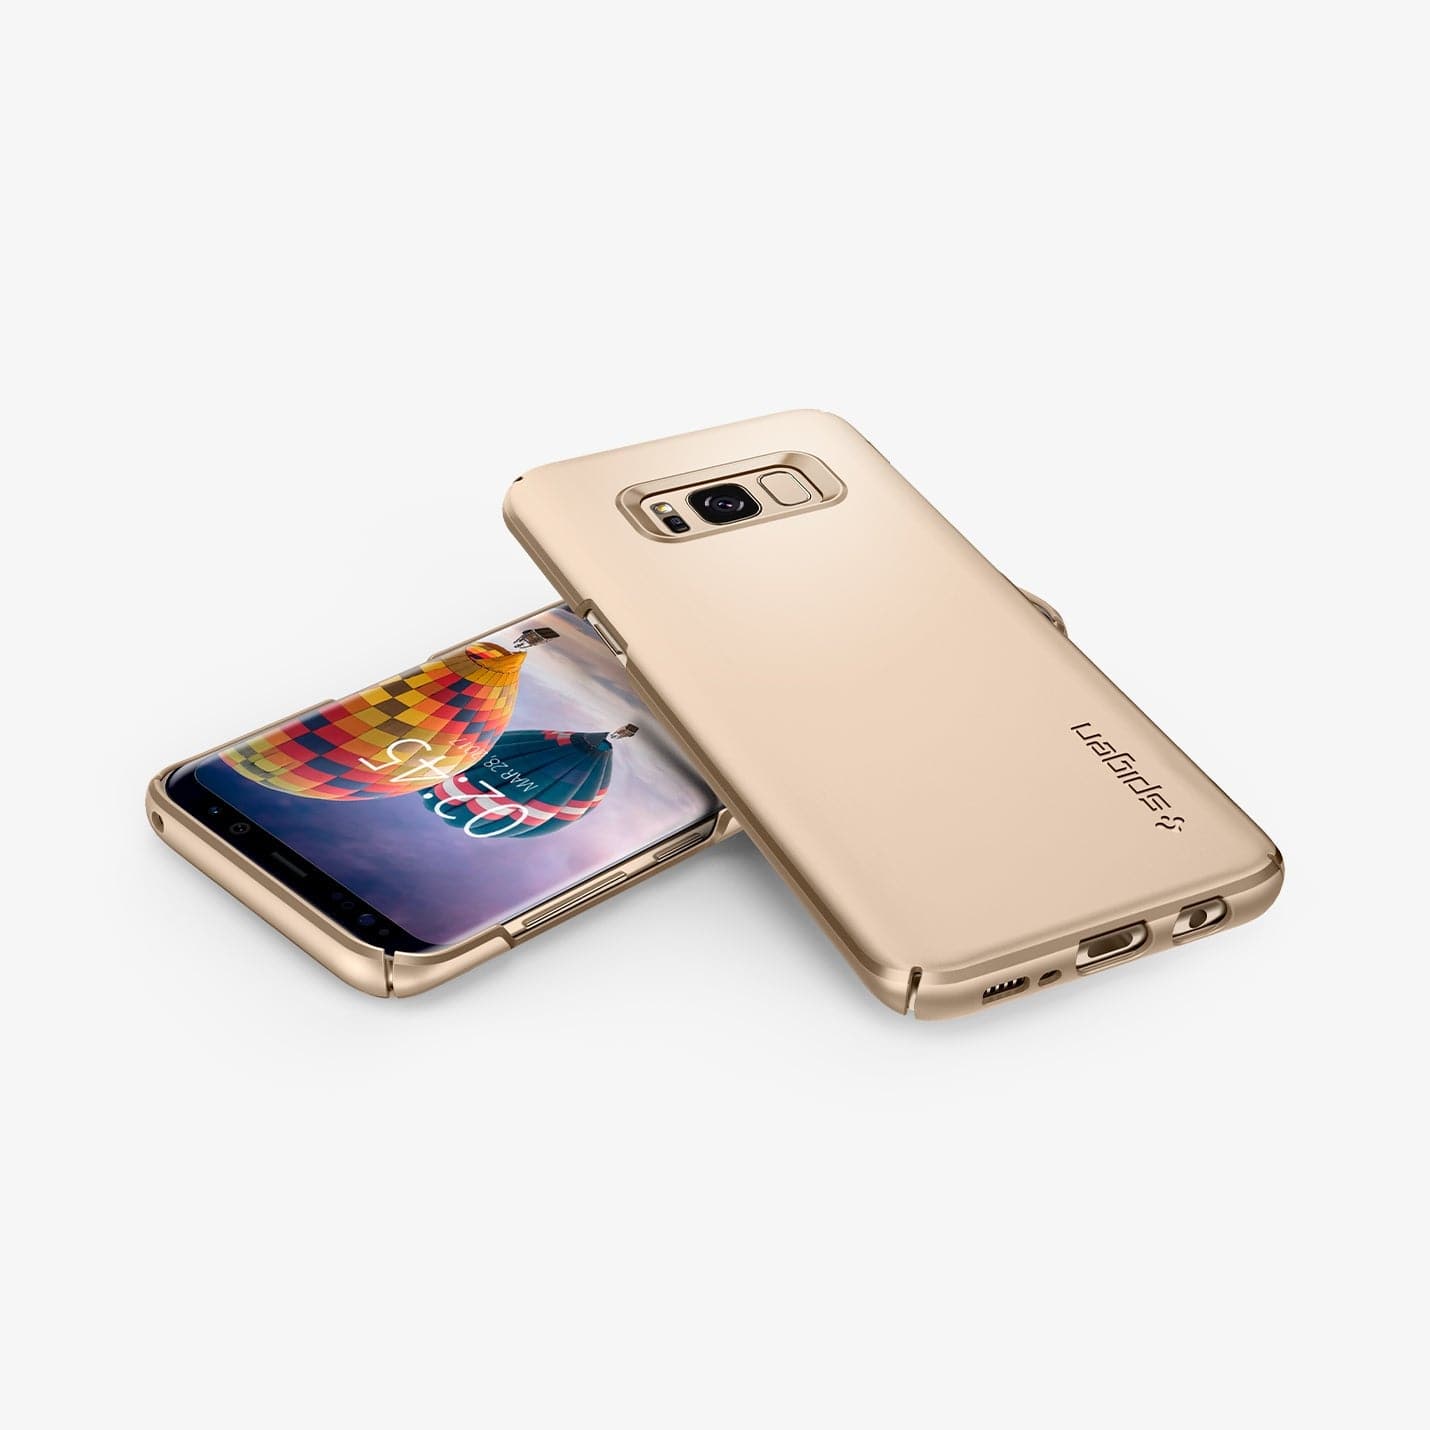 565CS21622 - Galaxy S8 Series Thin Fit Case in maple gold showing the back, front, sides, and bottom